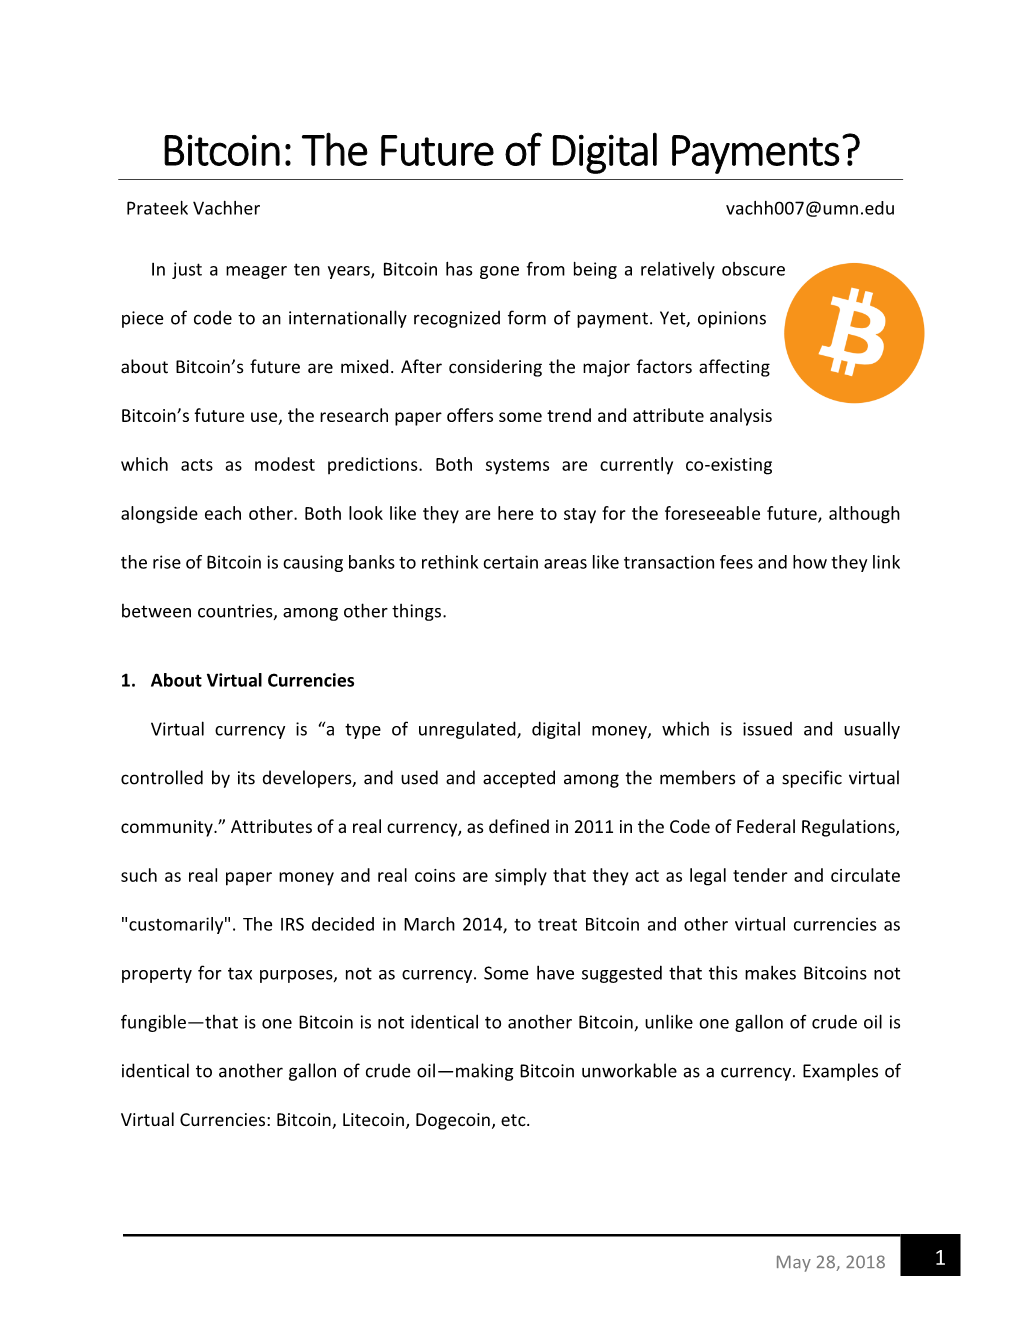 Bitcoin: the Future of Digital Payments?